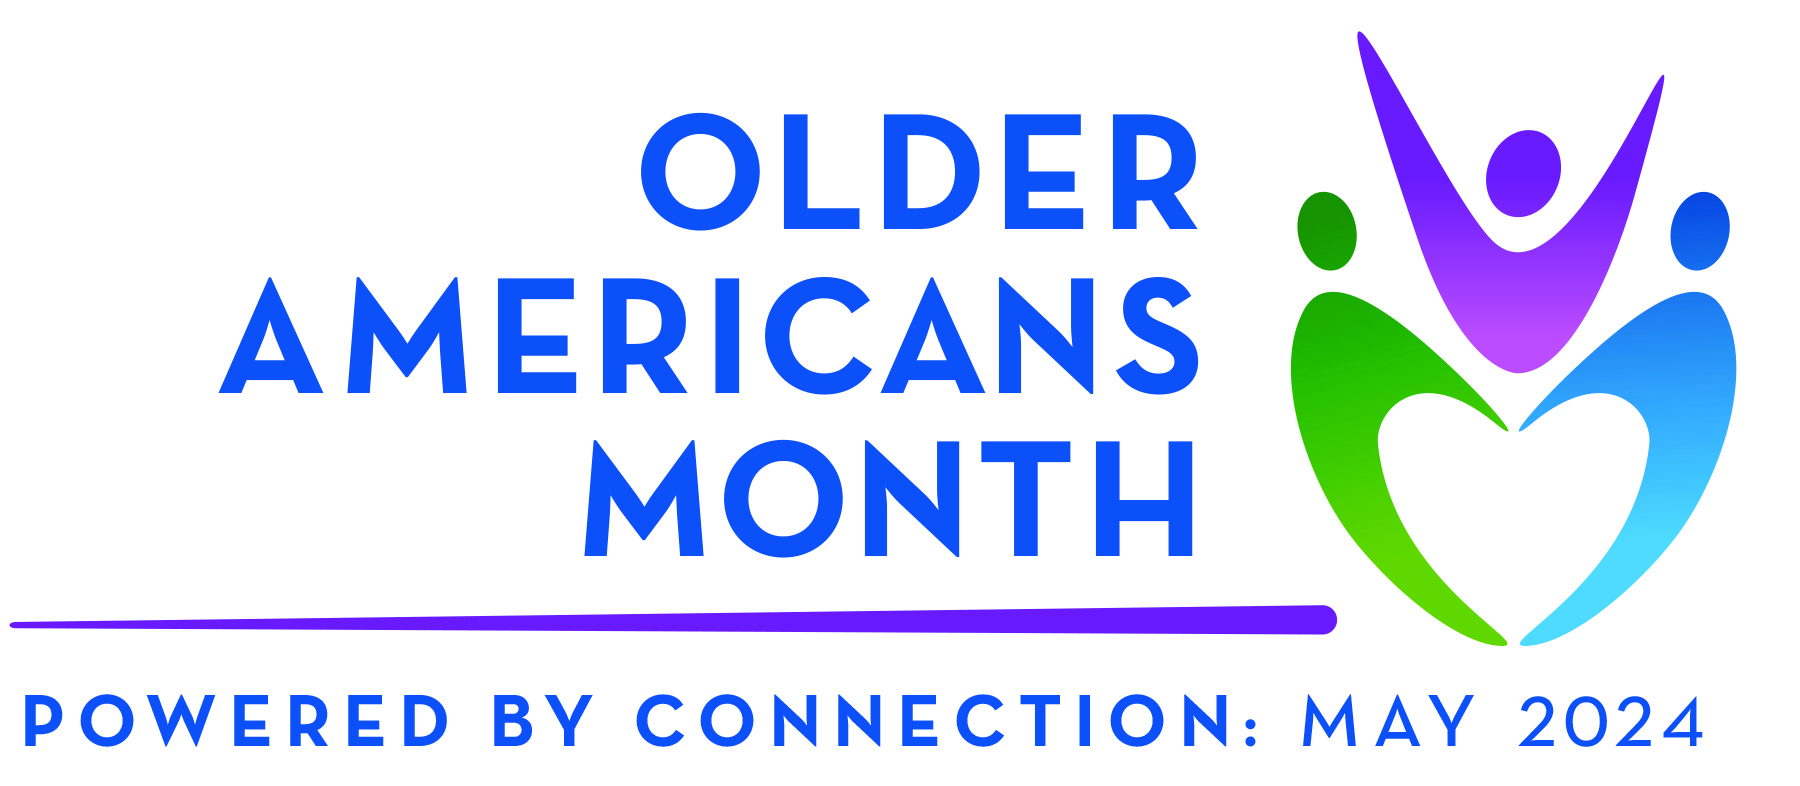 Older Americans Month: Powered by Connection May 2024